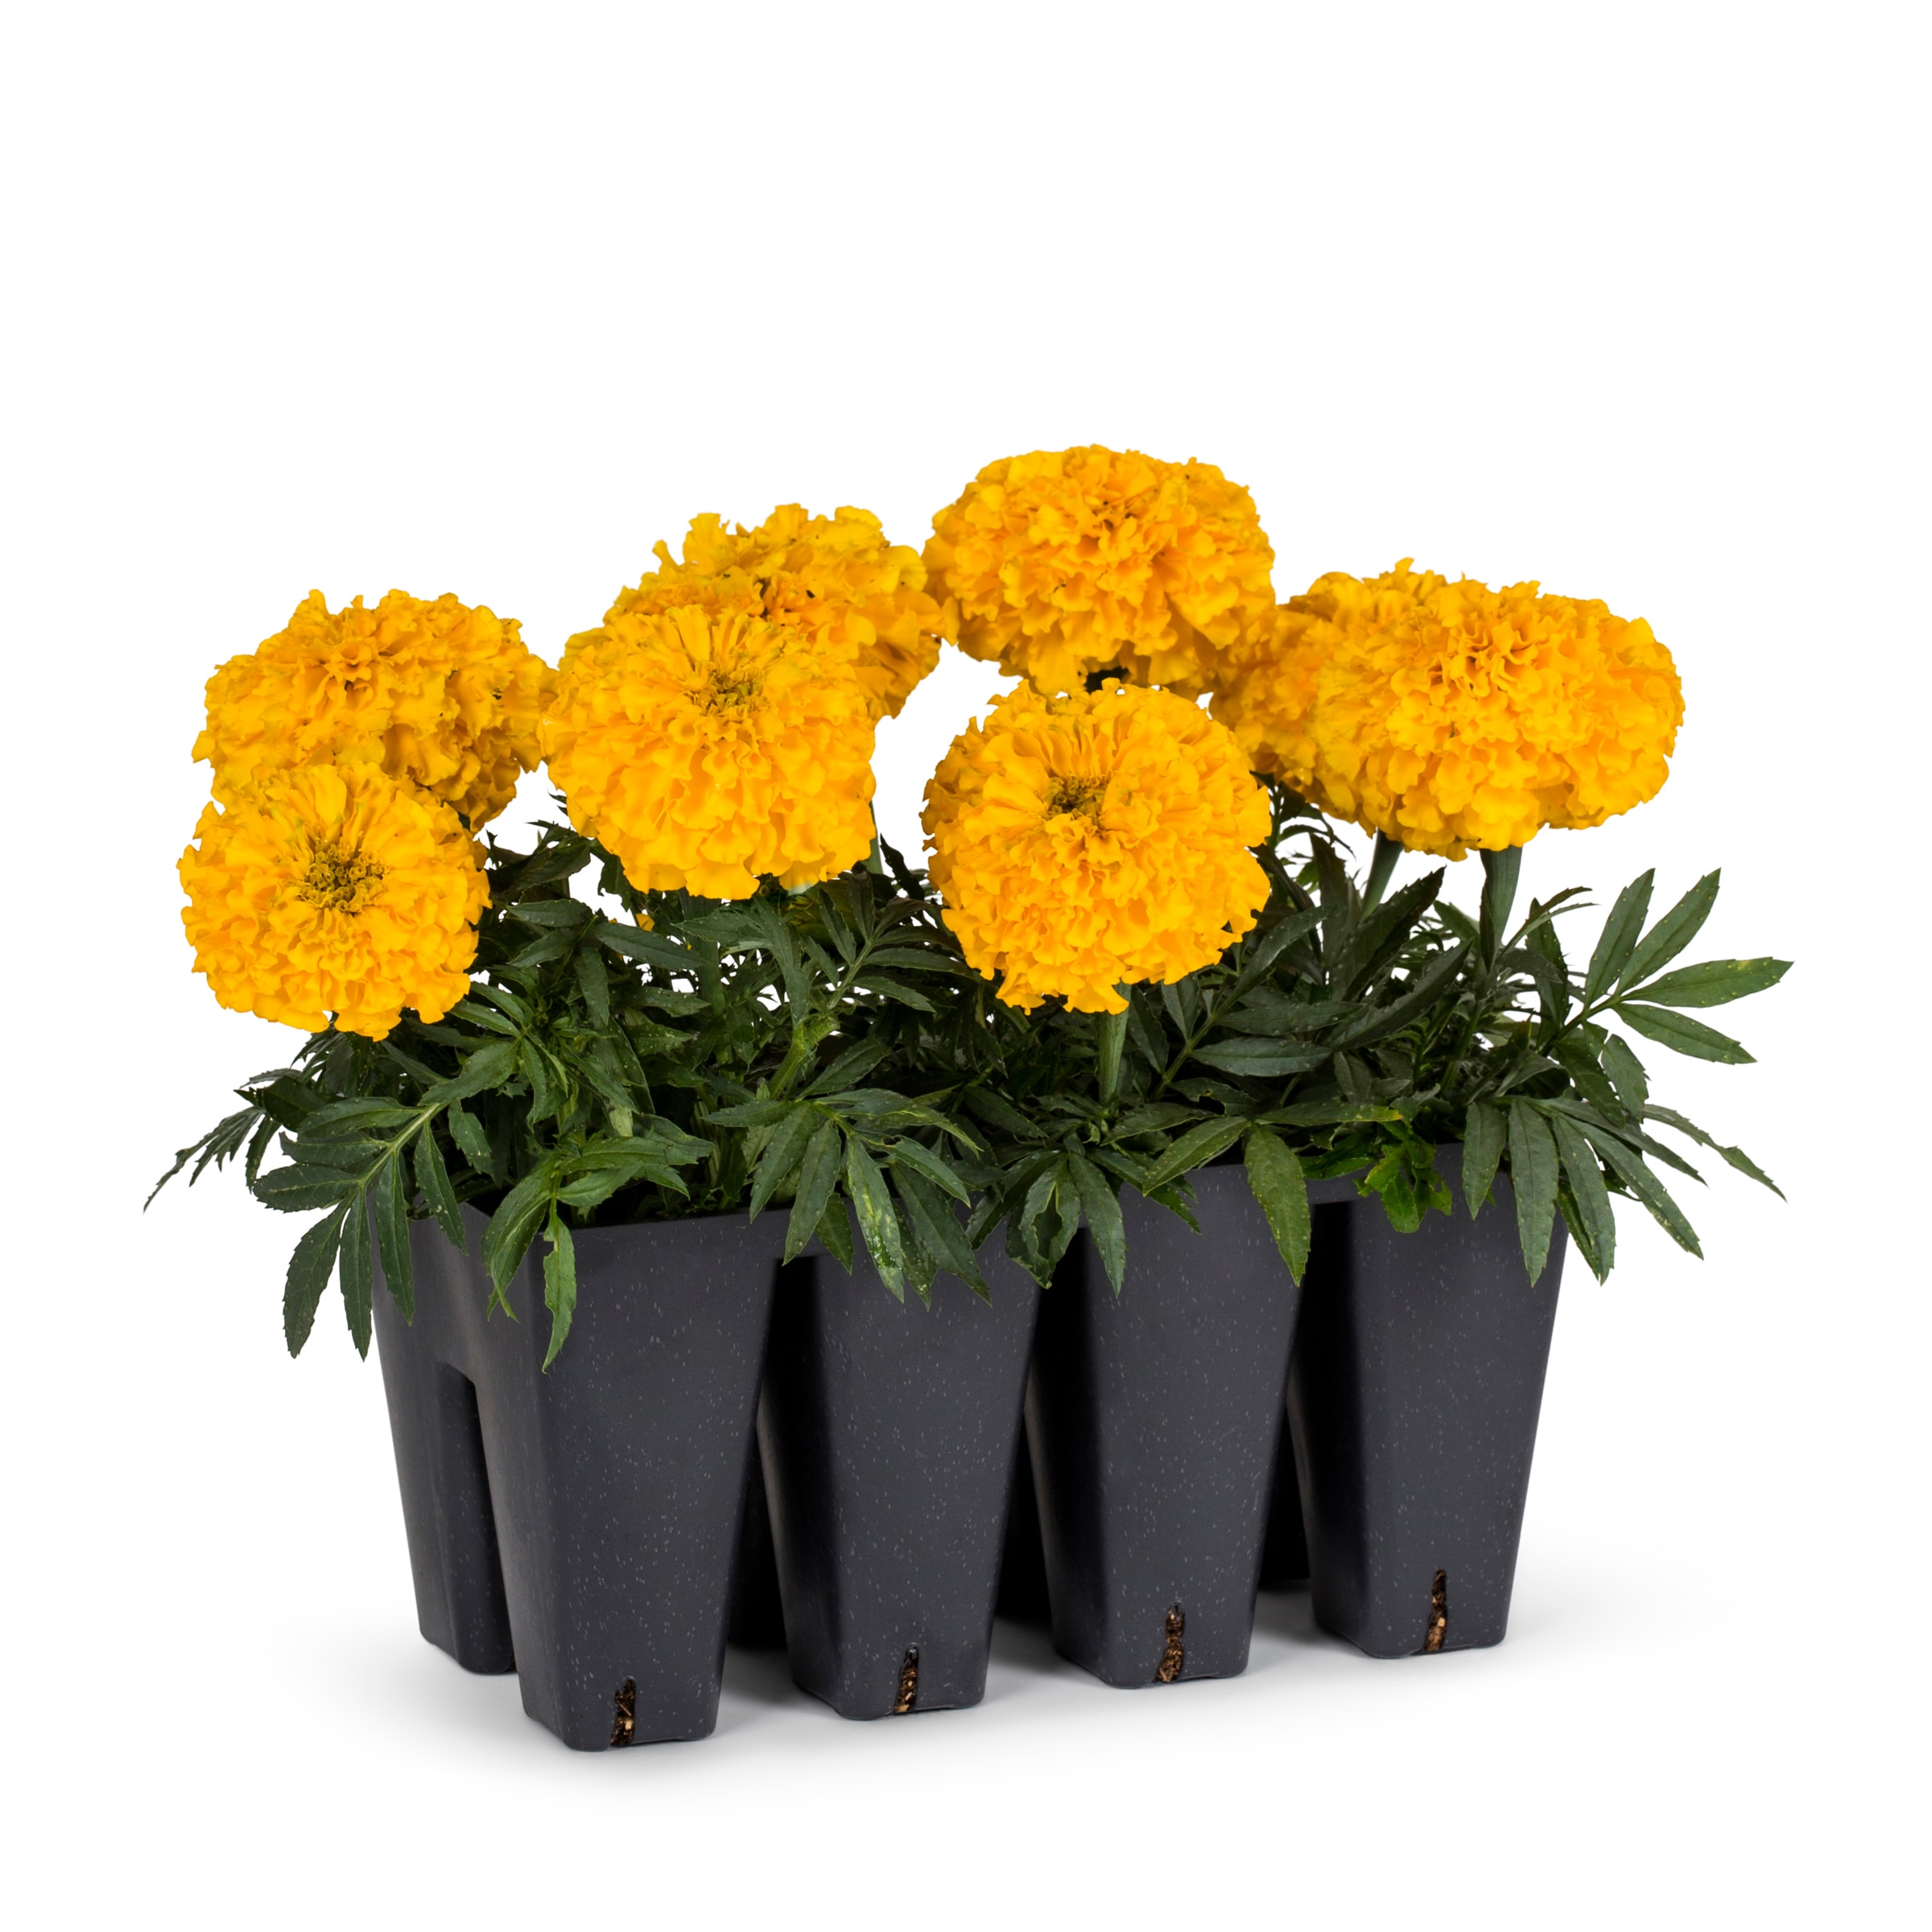 Deer Resistant Annuals at Lowes.com